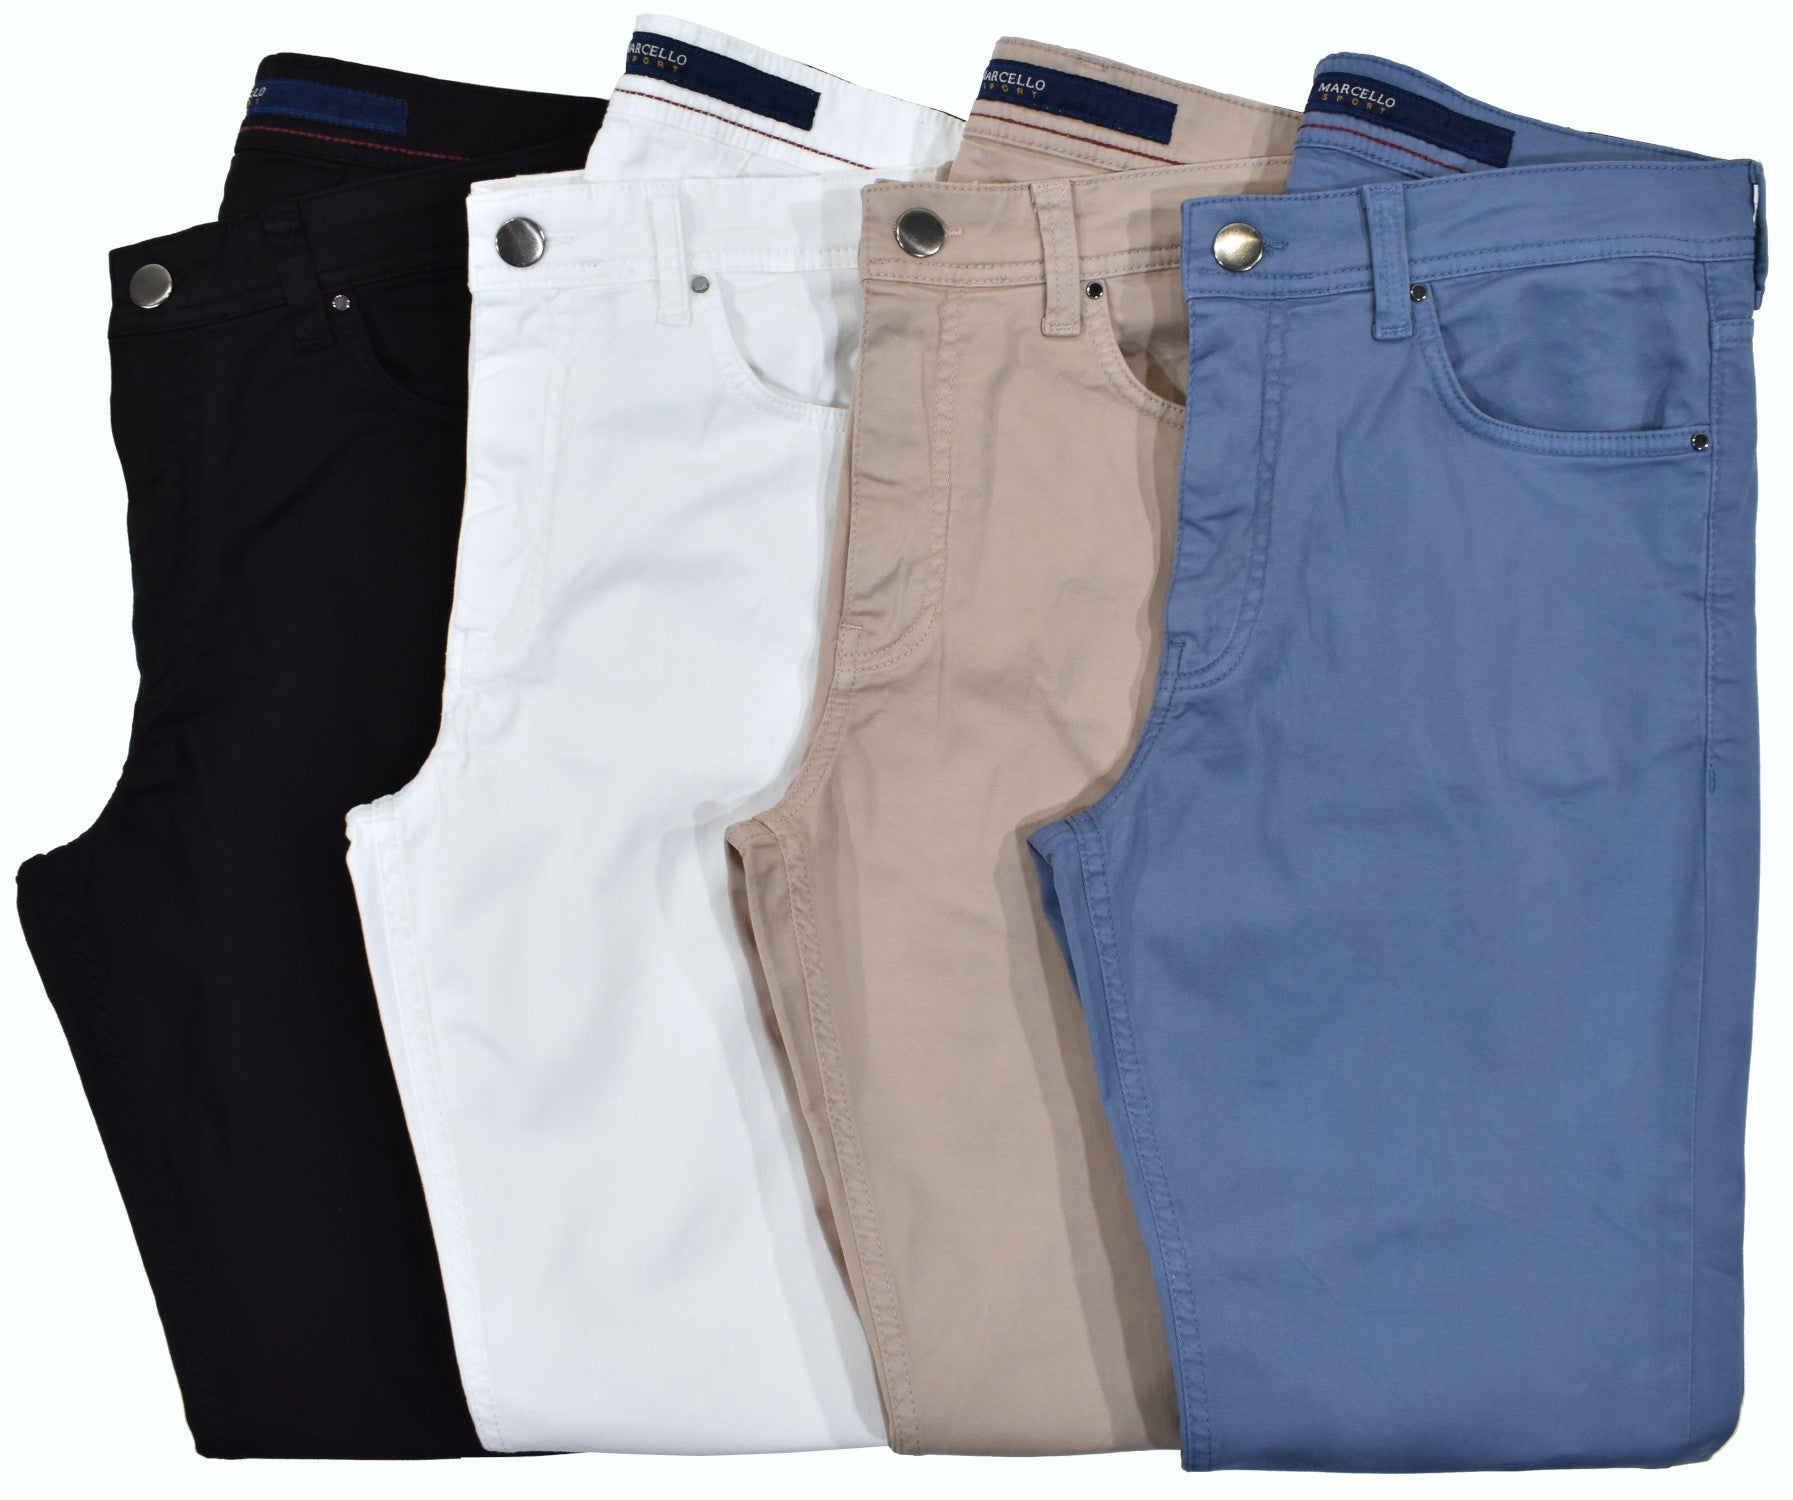 Marcello premium pant in a lightweight fine twill cotton with lycra for added comfort and stretch.   The fabric has a moderate amount of stretch to complement your natural movements and a soft peach finish to create an unbelievably comfortable feel. 